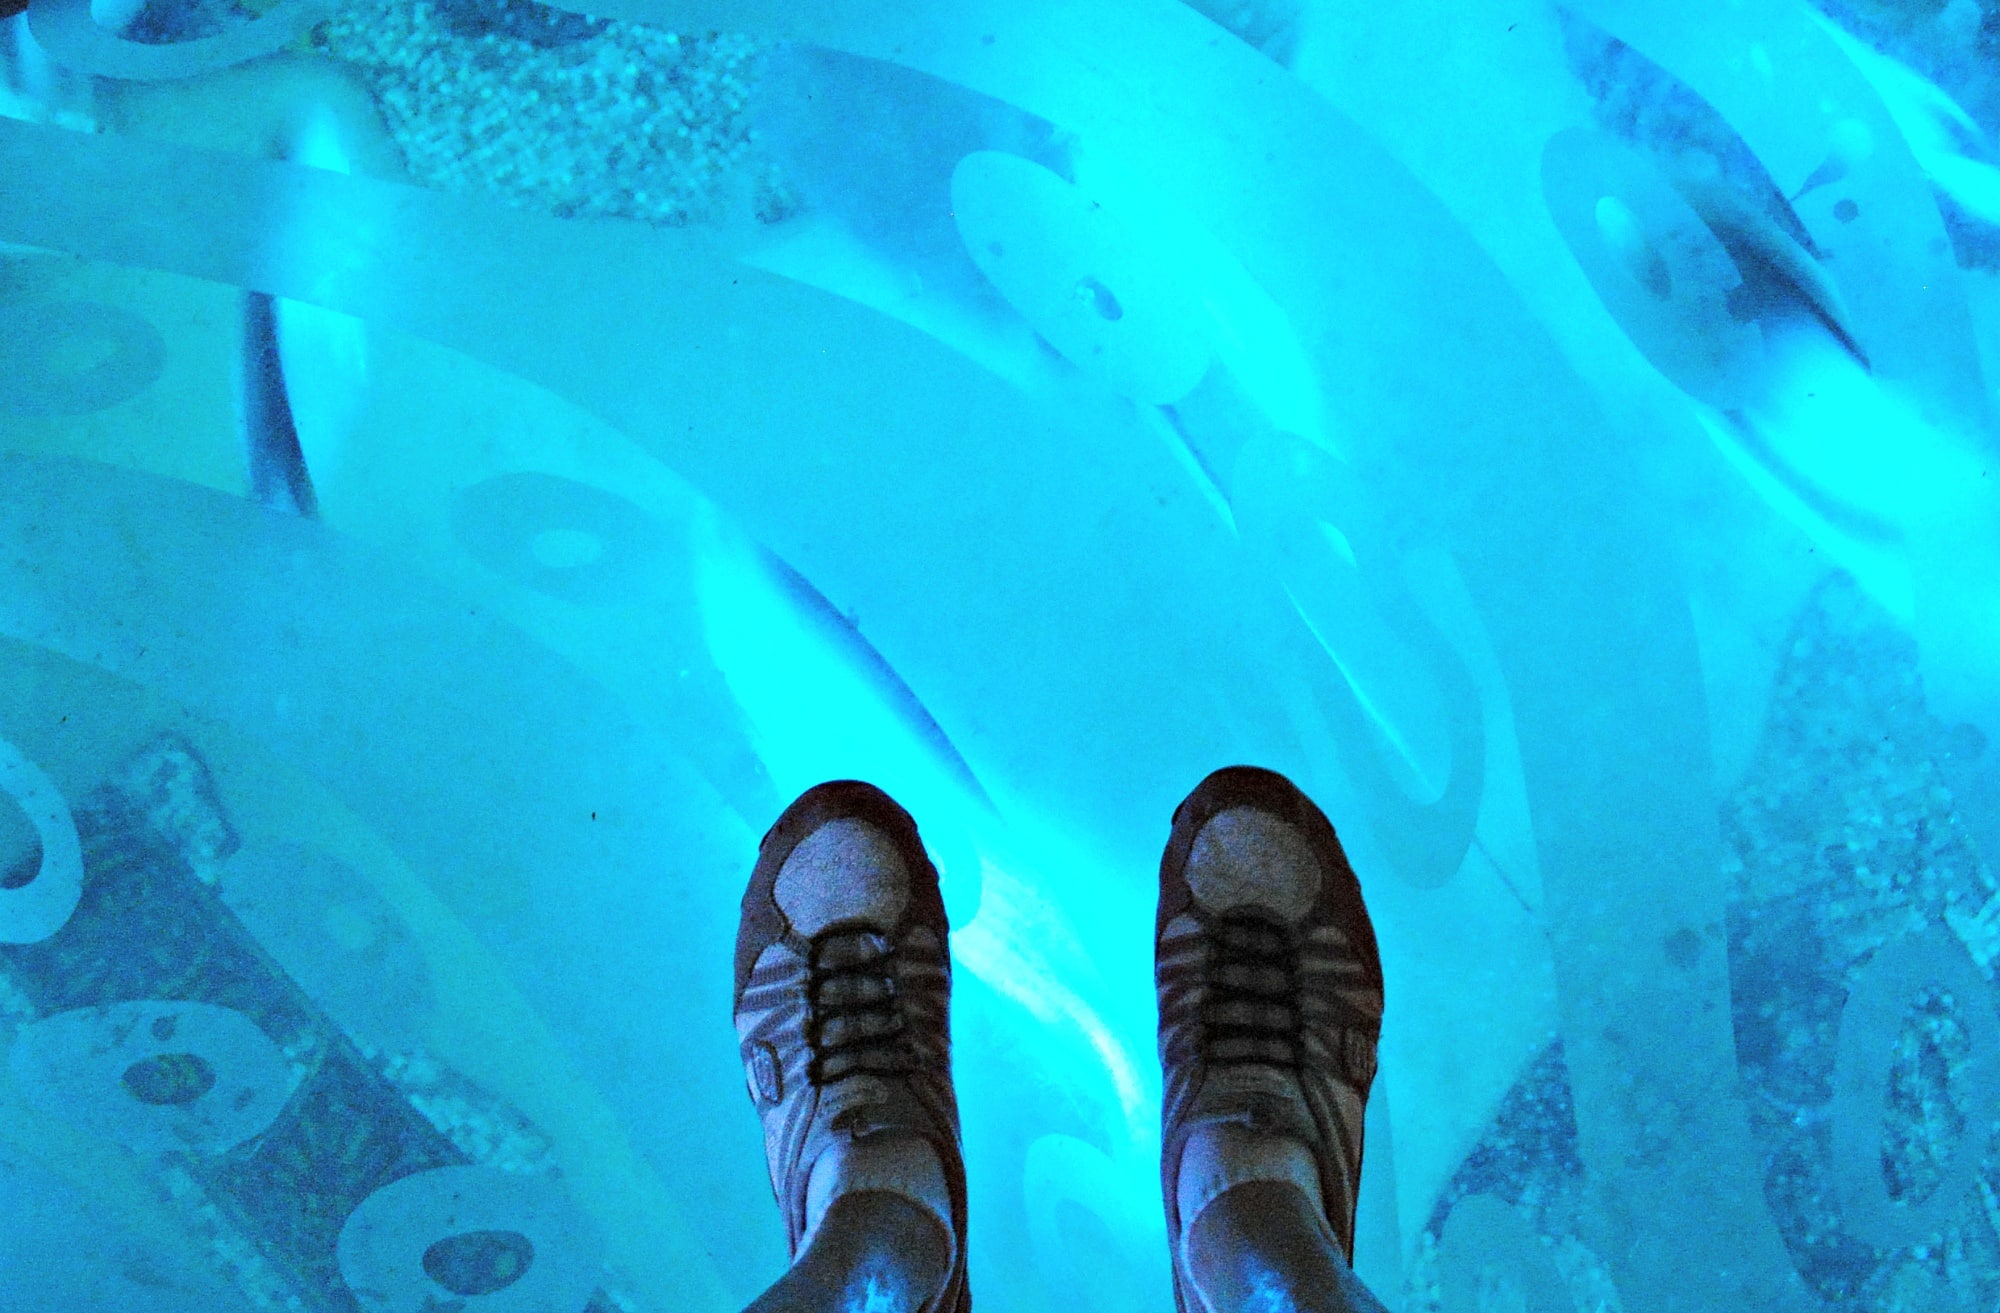 My very wet feet standing on top of an in-floor fish tank at the Jewel of the Sea Aquarium at SeaWorld Orlando in the rain